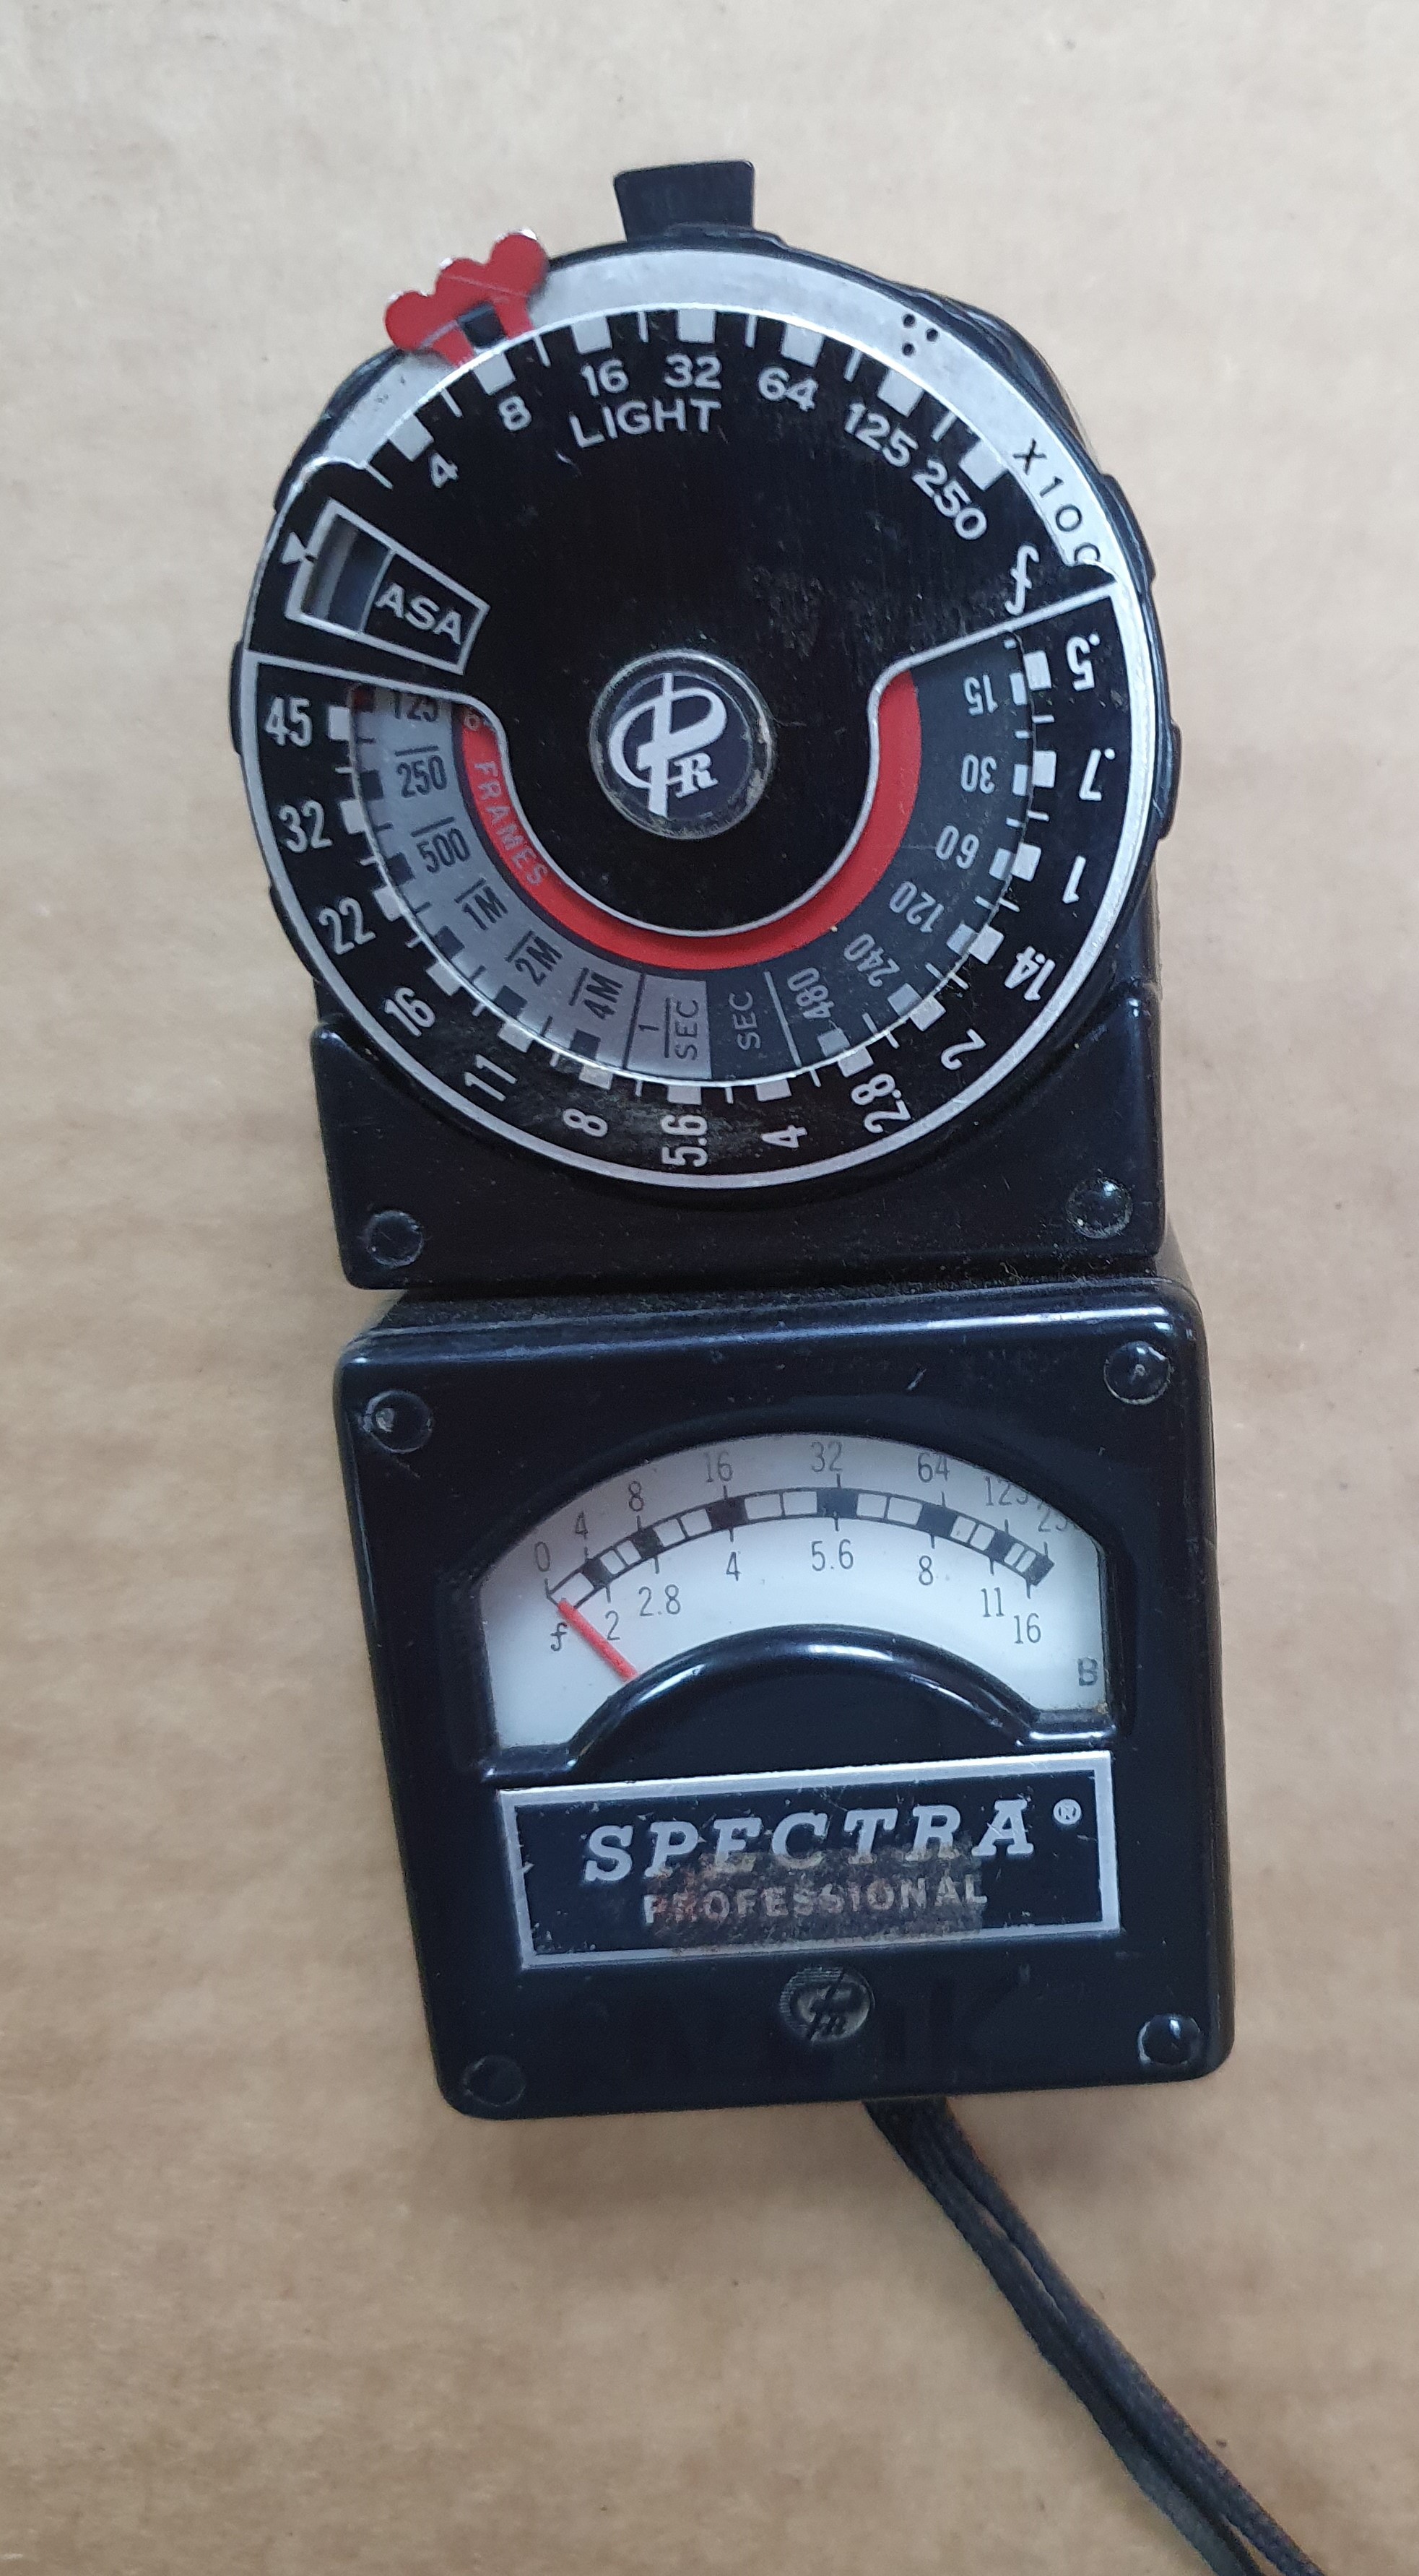 Light meter for photography on film Spectra p-251